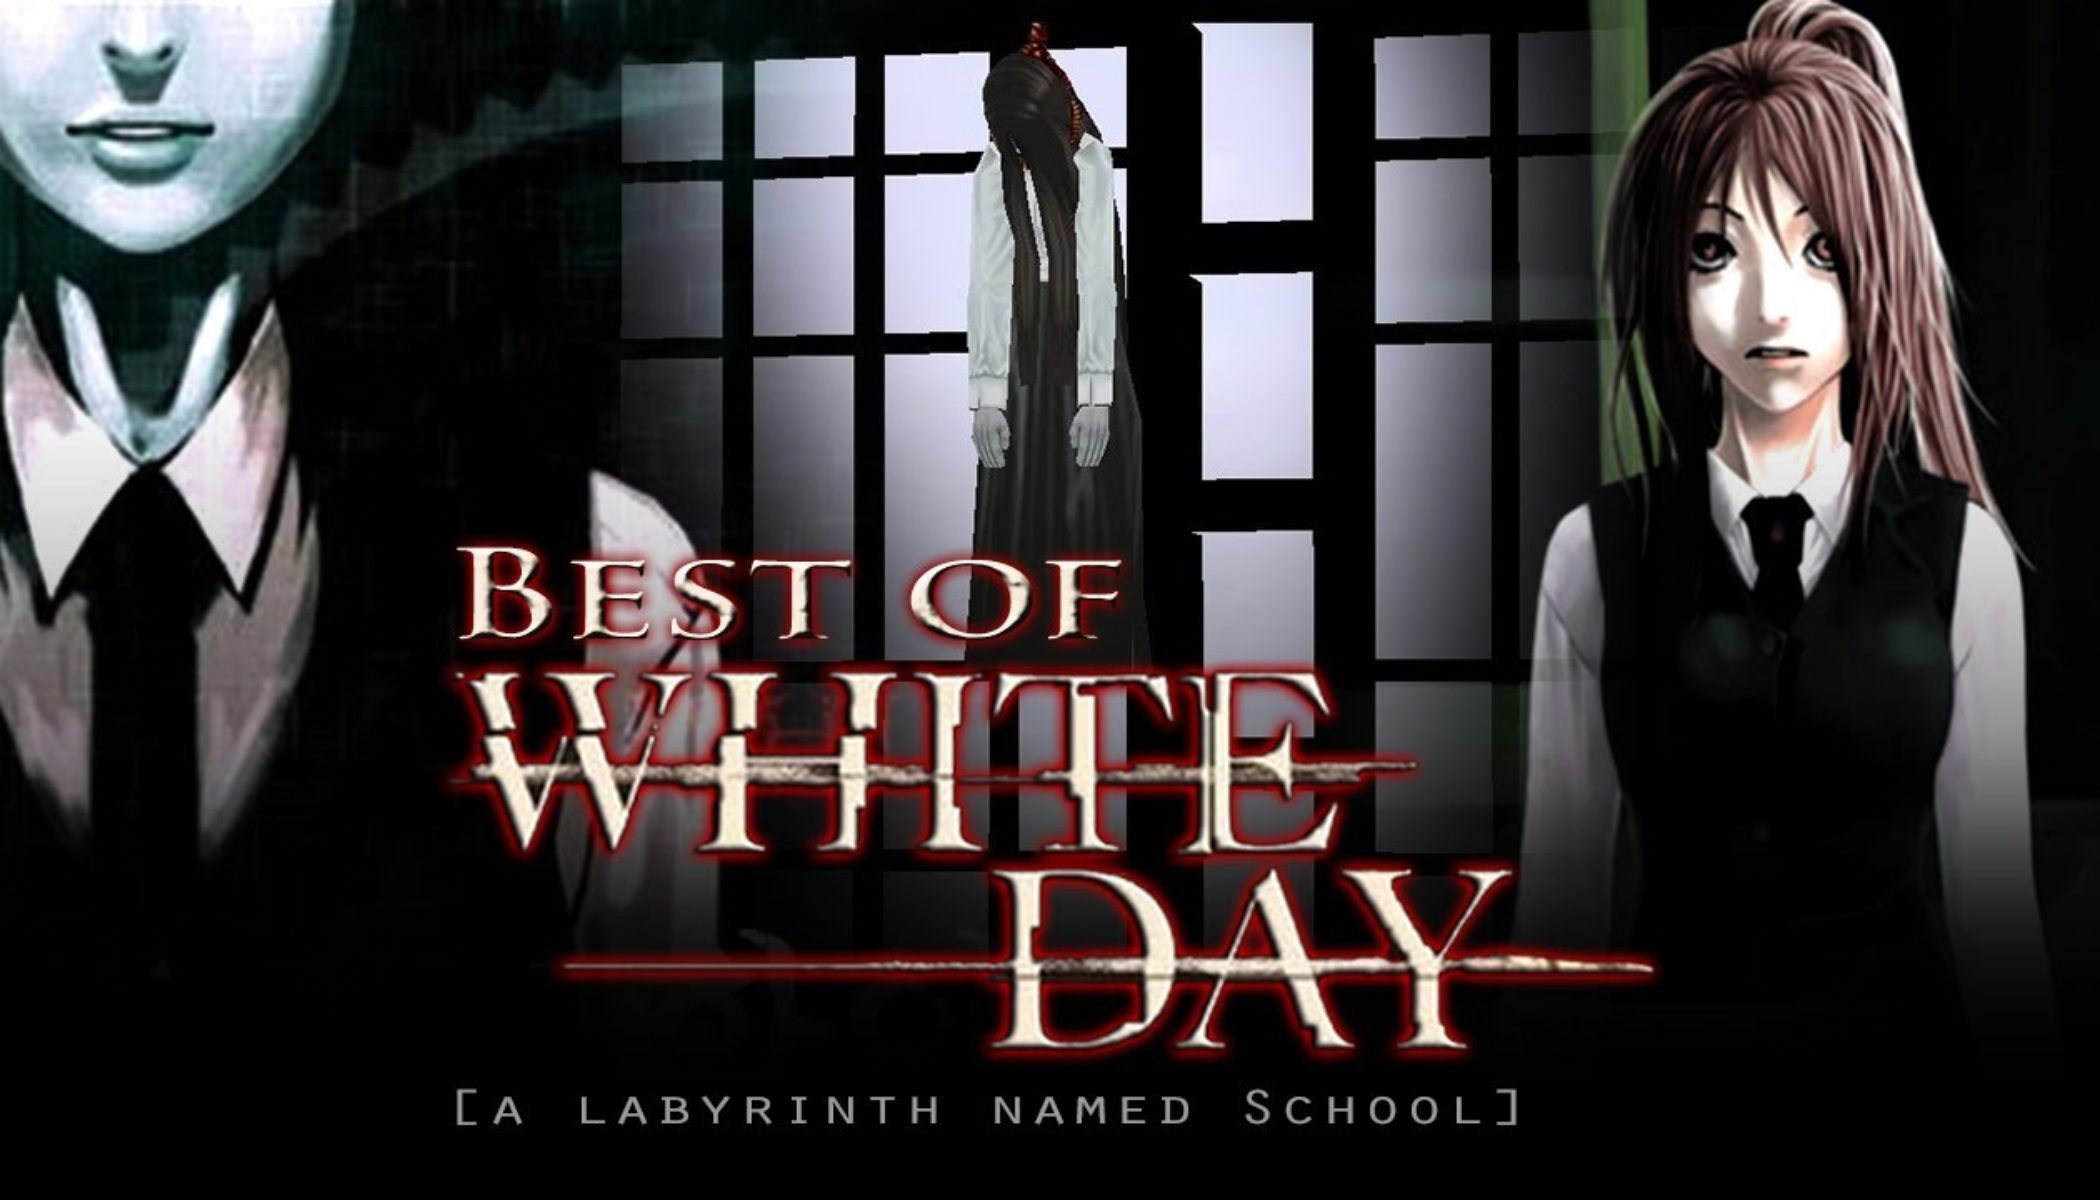 a white day a labyrinth named school